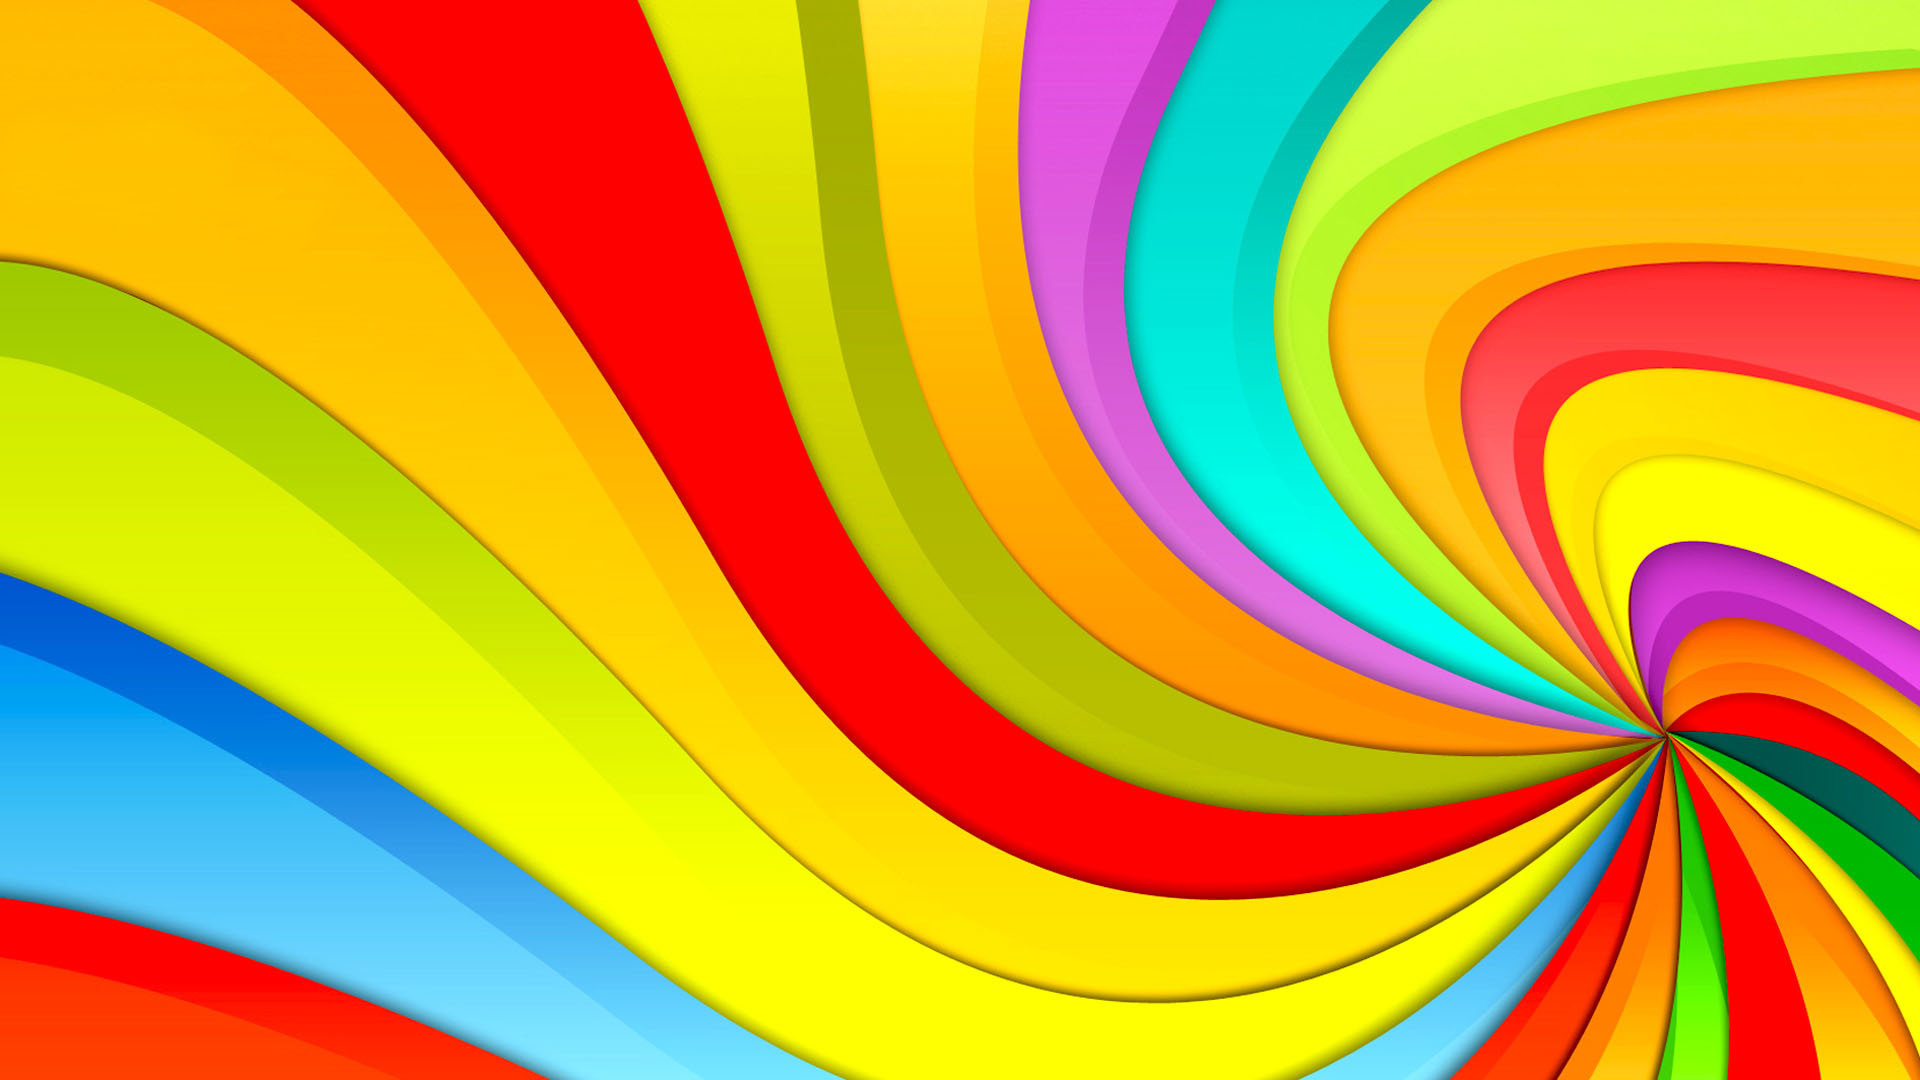 Colorful Desktop Backgrounds - Bright Colored Desktop Backgrounds , HD Wallpaper & Backgrounds